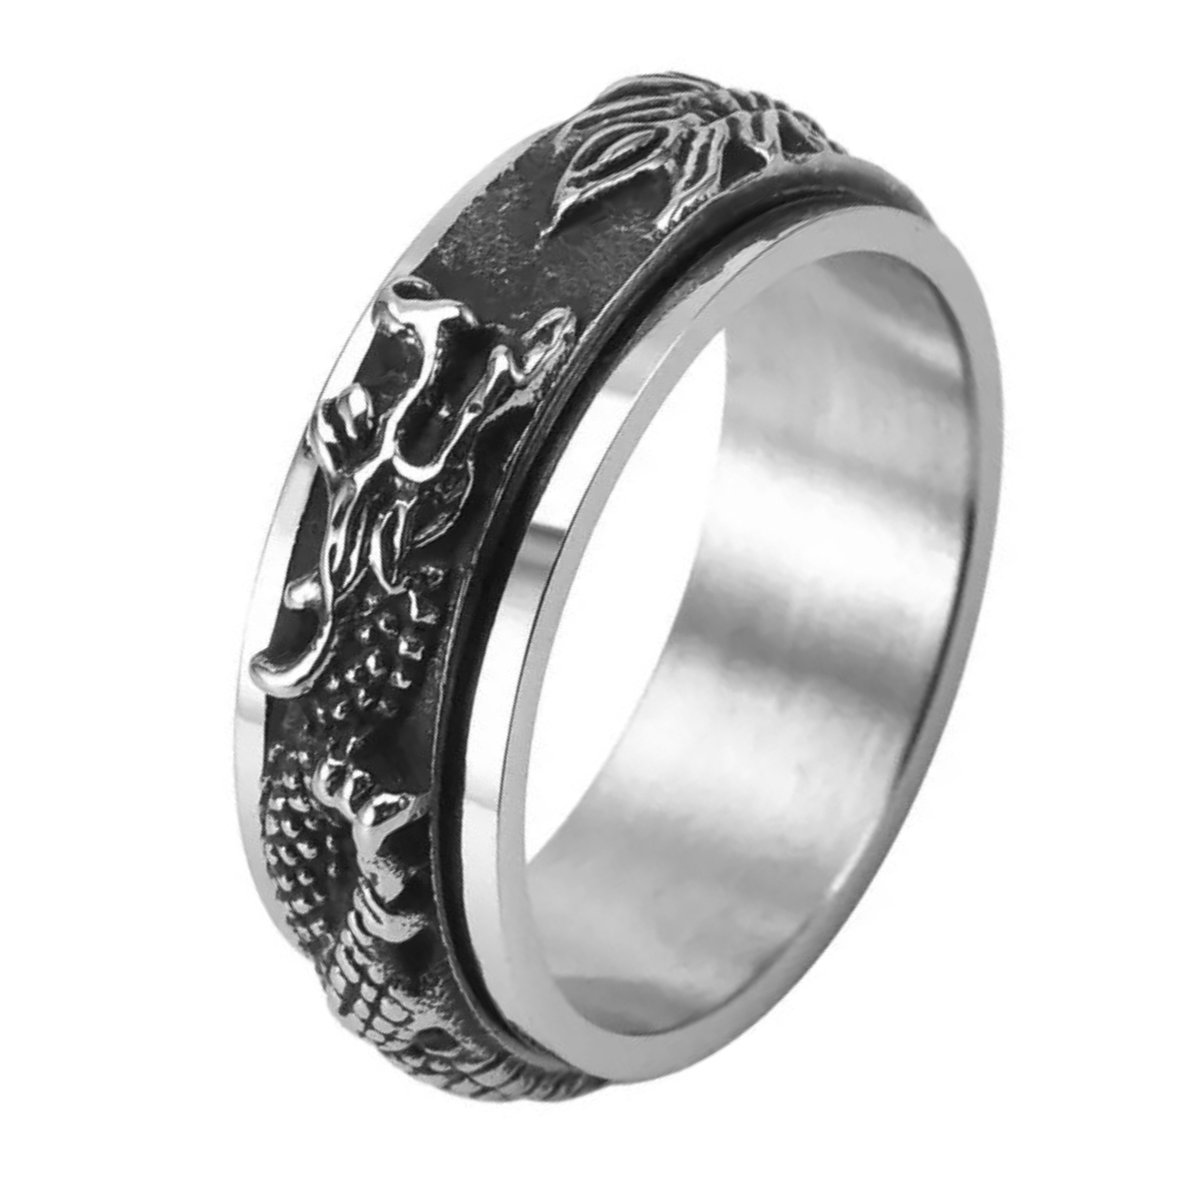 Anxiety Ring - (Draak) - Stress Ring - Fidget Ring - Anxiety Ring For Finger - Draaibare Ring - Spinning Ring - Zilver - (21.25 mm / maat 67) - Despora